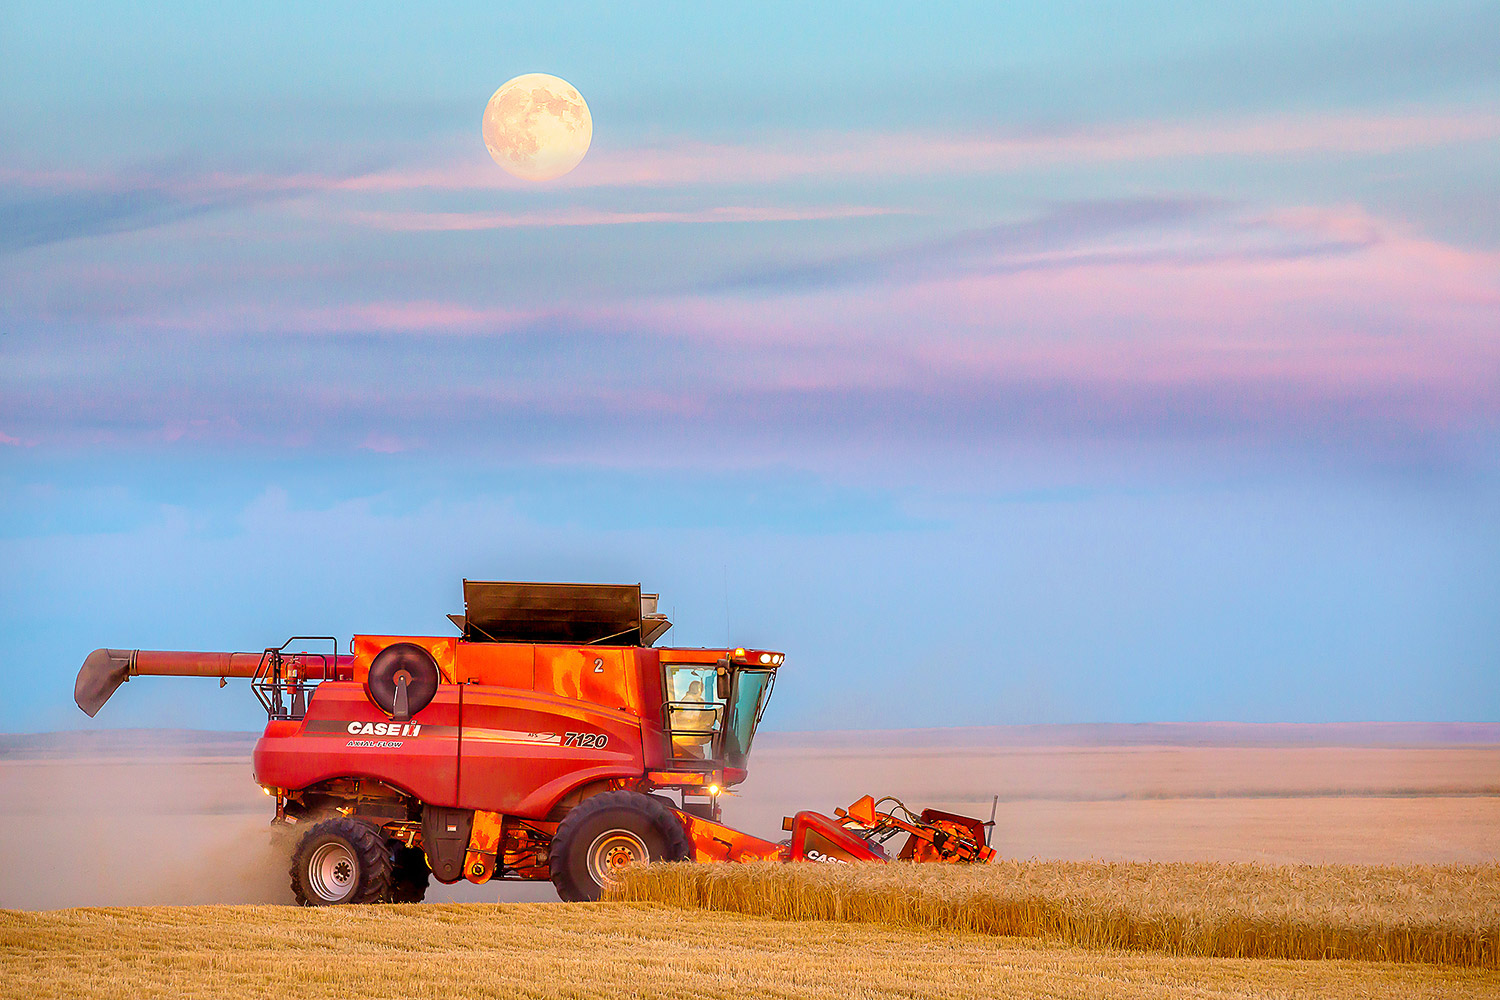 The Super Moon rises over the wheat fields as farmers work late cutting wheat north of Havre, Montana.&nbsp;→ Buy a Print